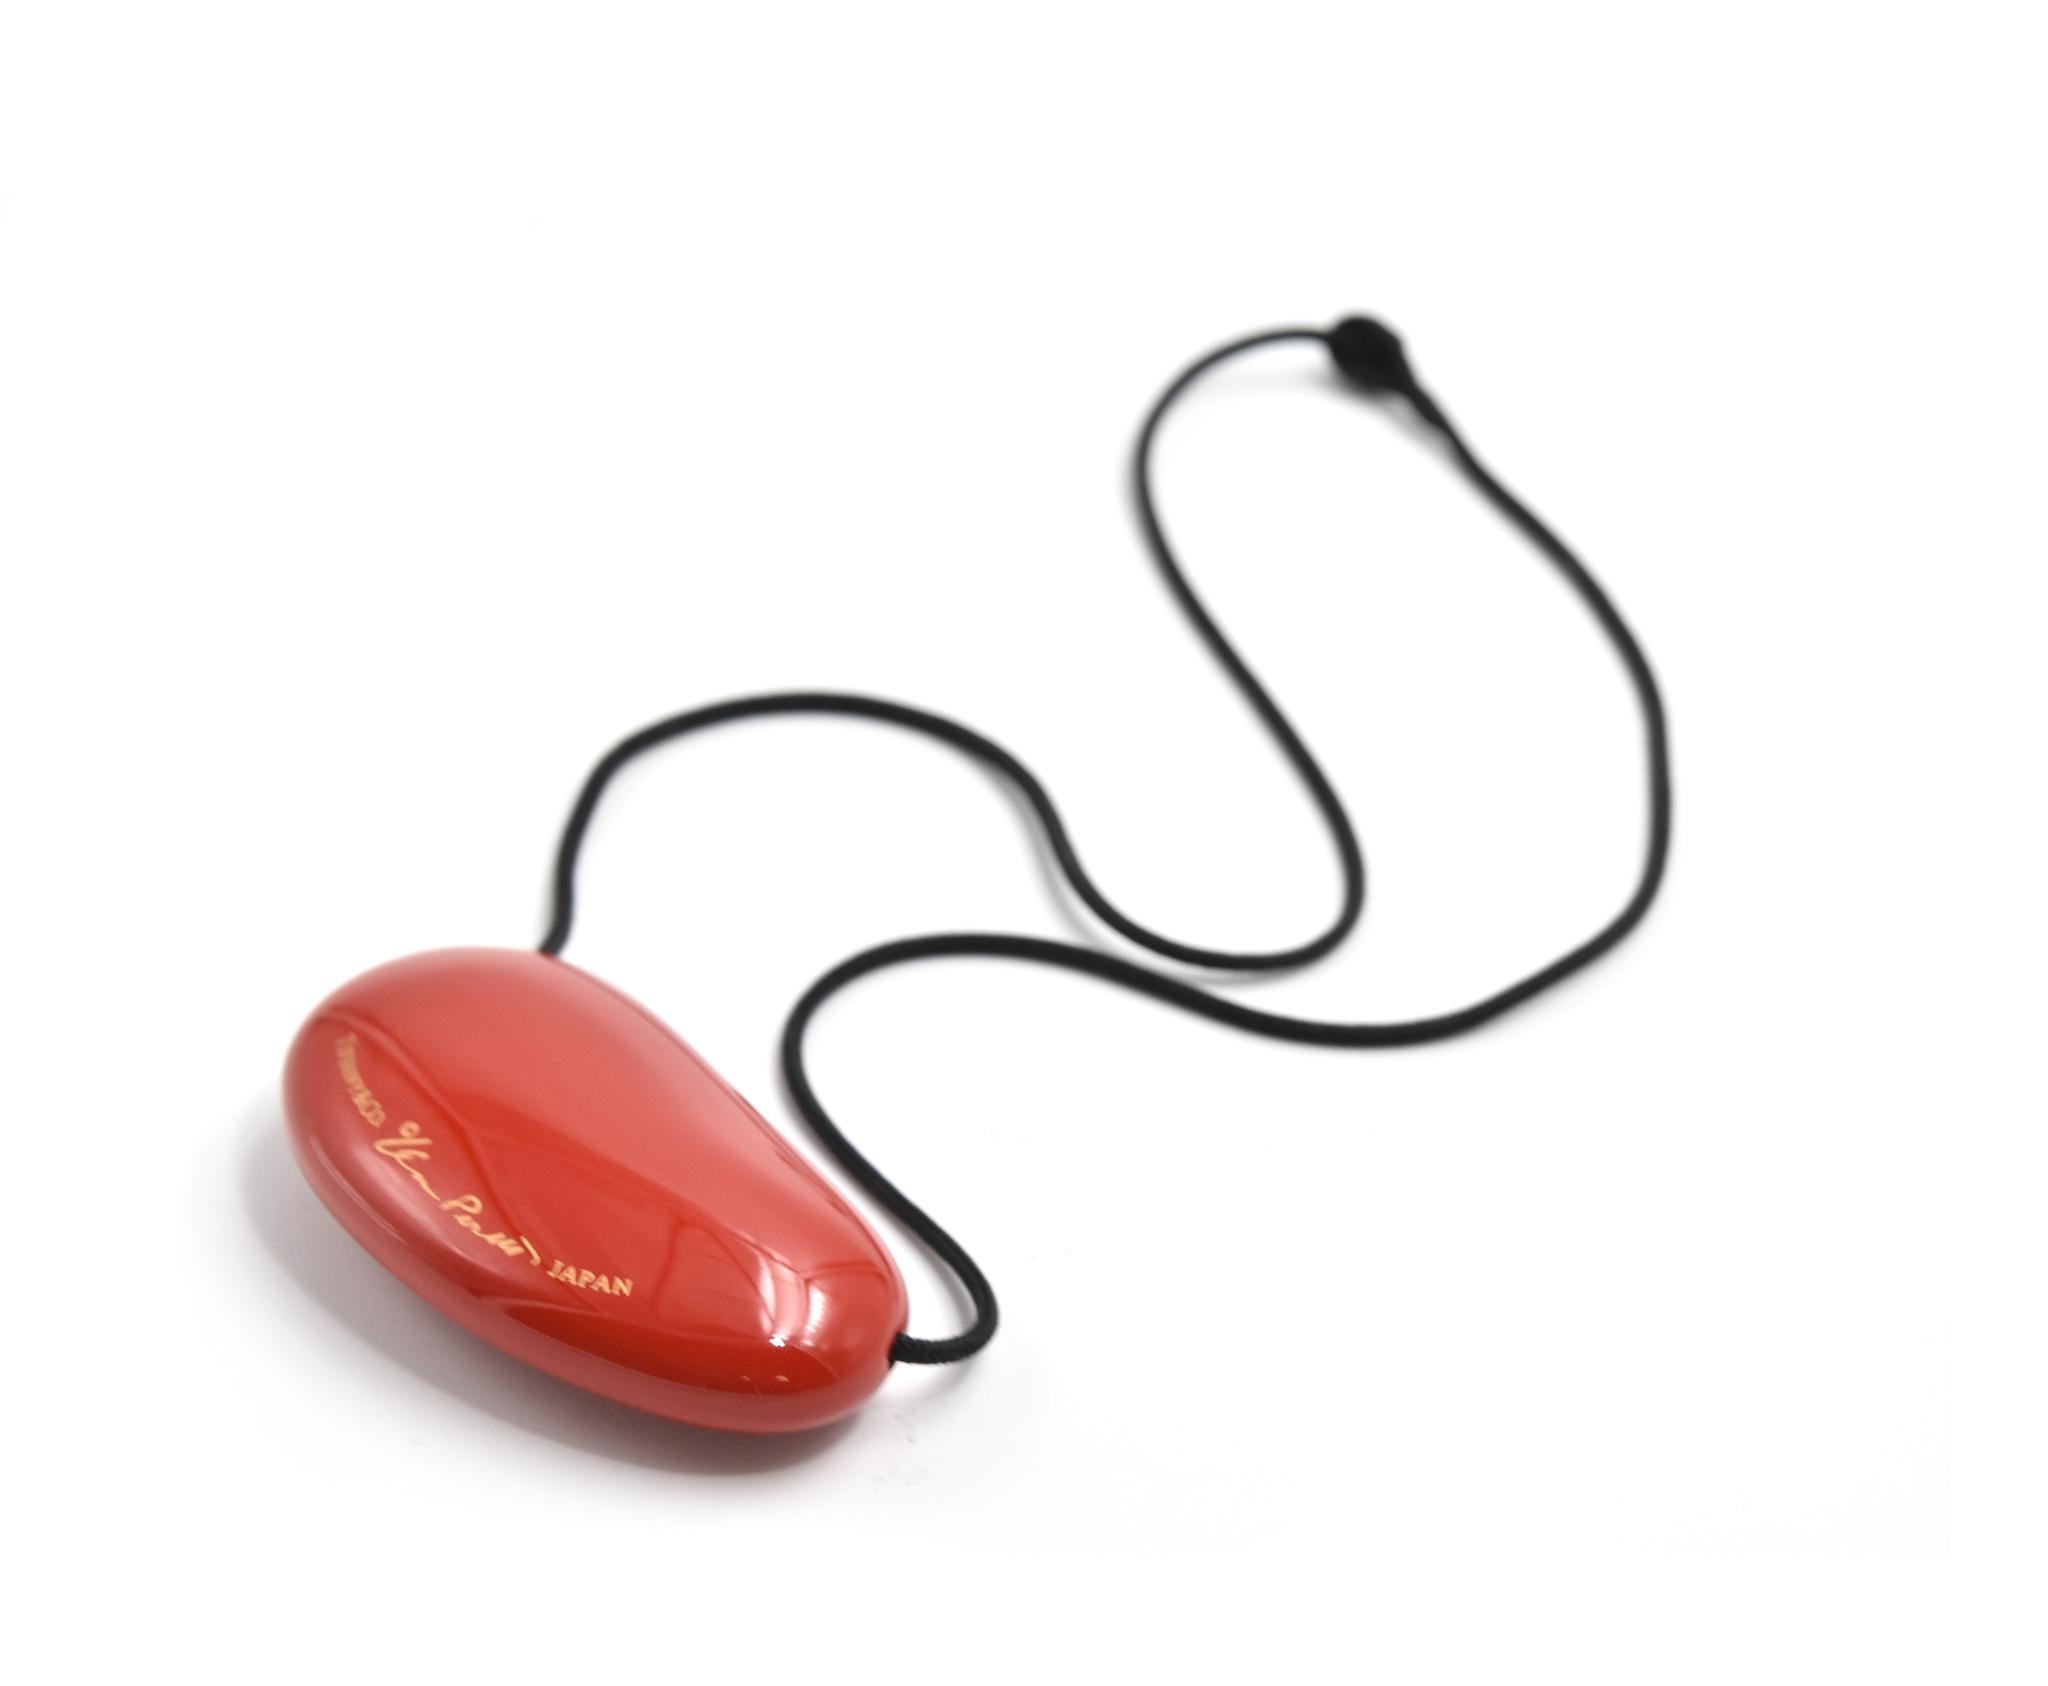 Designer: Tiffany & Co
Hallmarks: T & CO
Material: red lacquer over Japanese hardwood
Dimensions: necklace is 18-inch long, pendant is 1 3/4-inch long and 1-inch wide
Weight: 6.98 grams
Retail: $265
